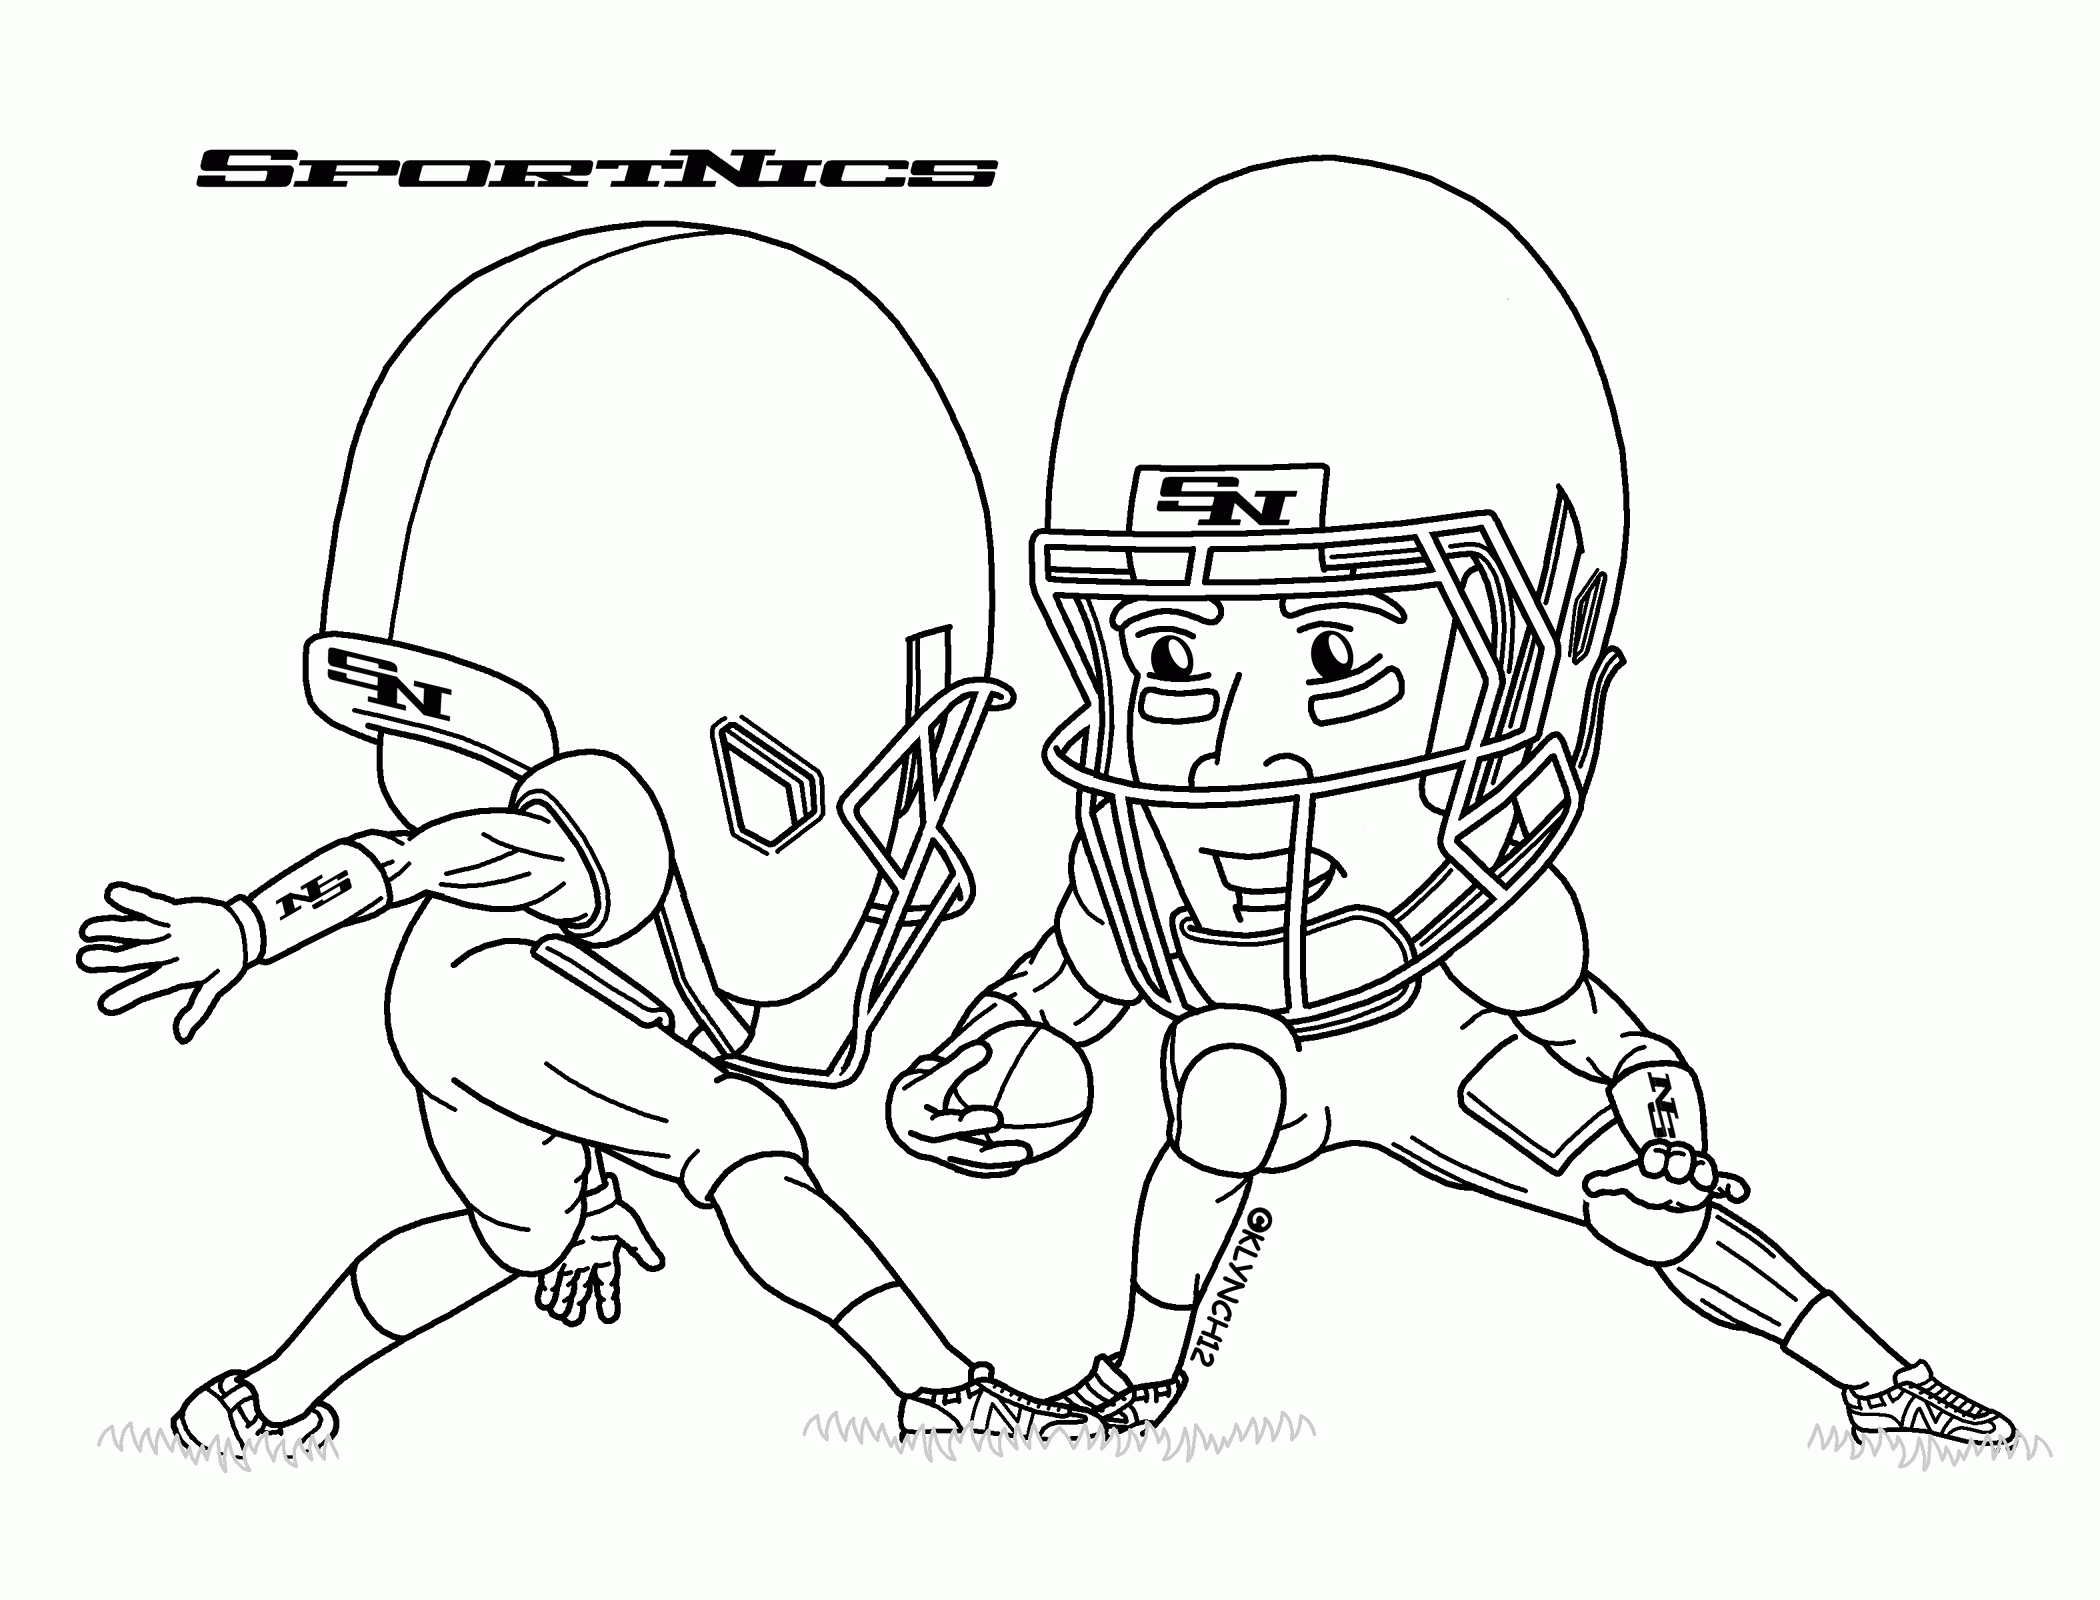 49ers Coloring Pages - Clip Art Library